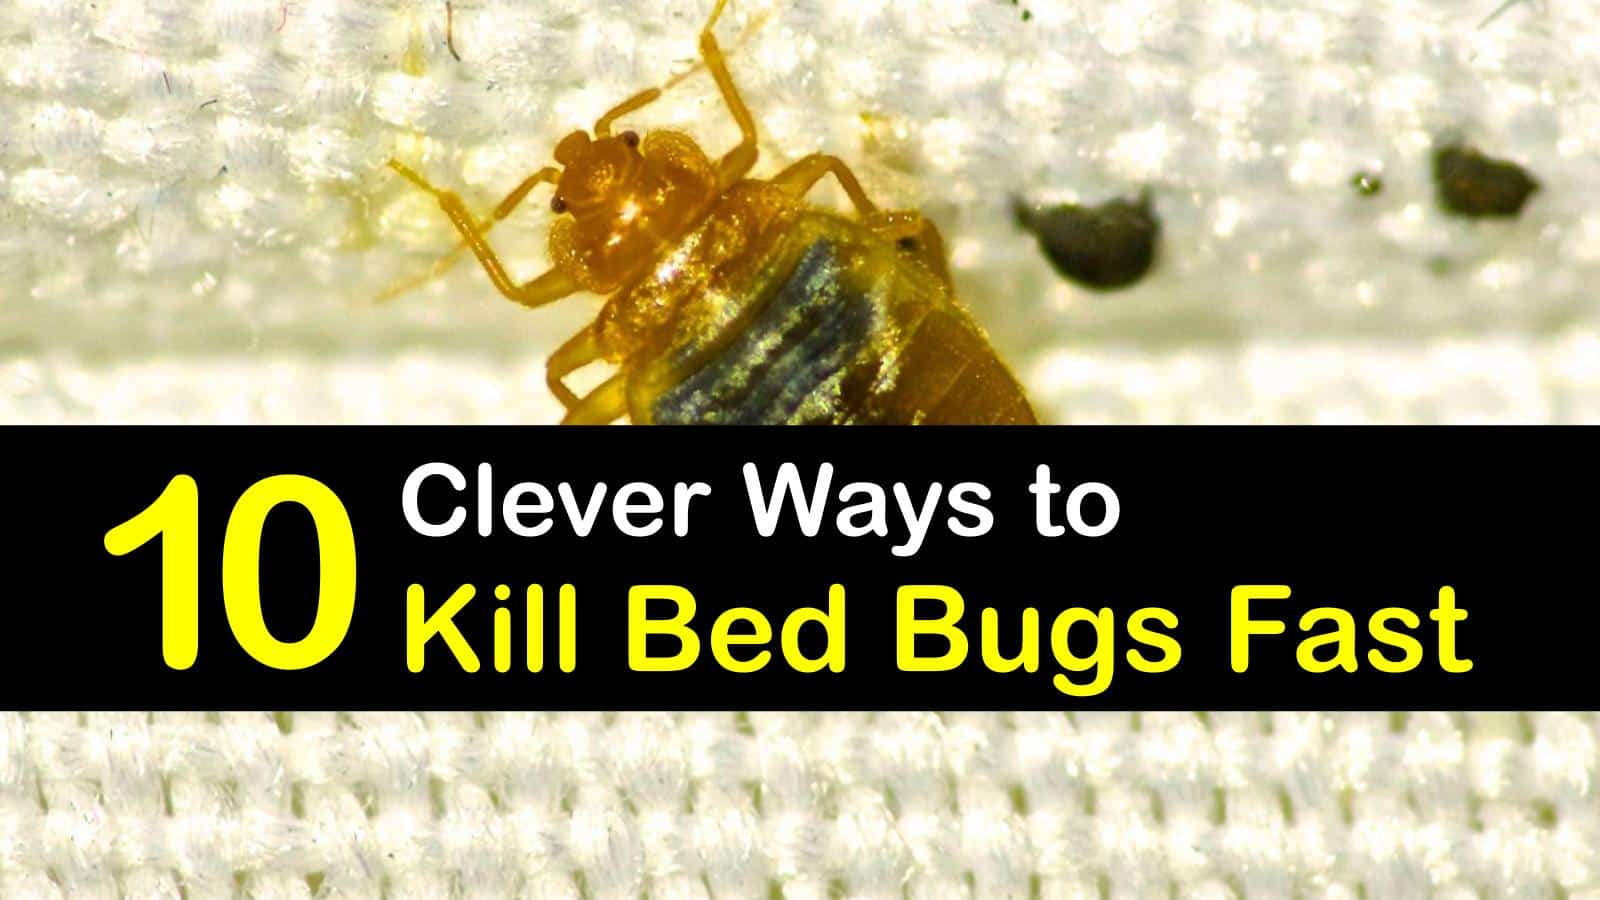 does steaming a mattress kill bed bugs